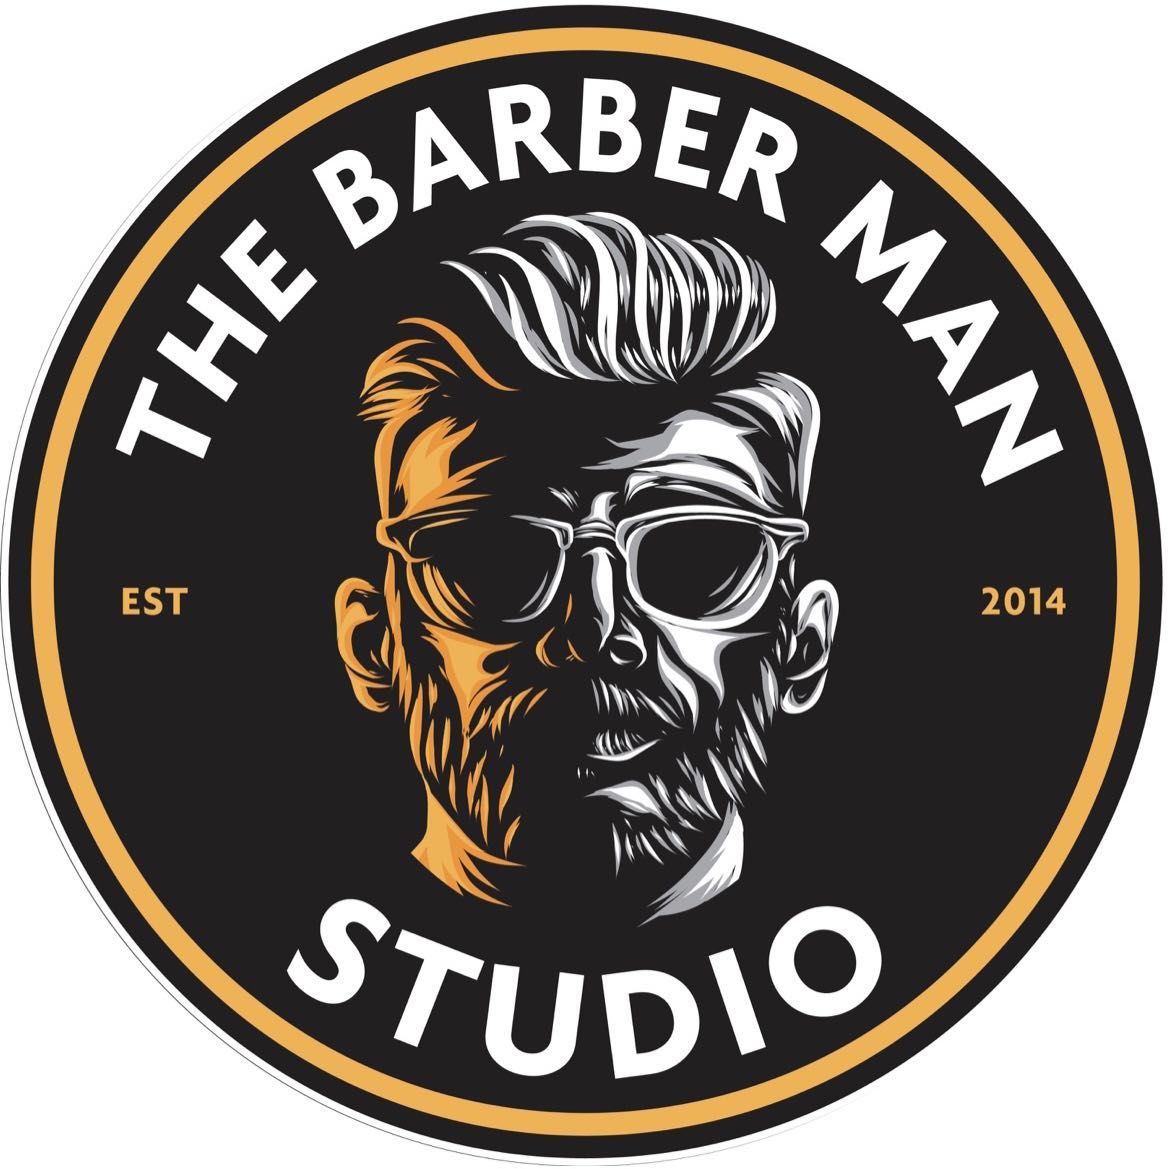 THE BARBER MAN STUDIO, 292 Perth Road, DD2 1AN, Dundee